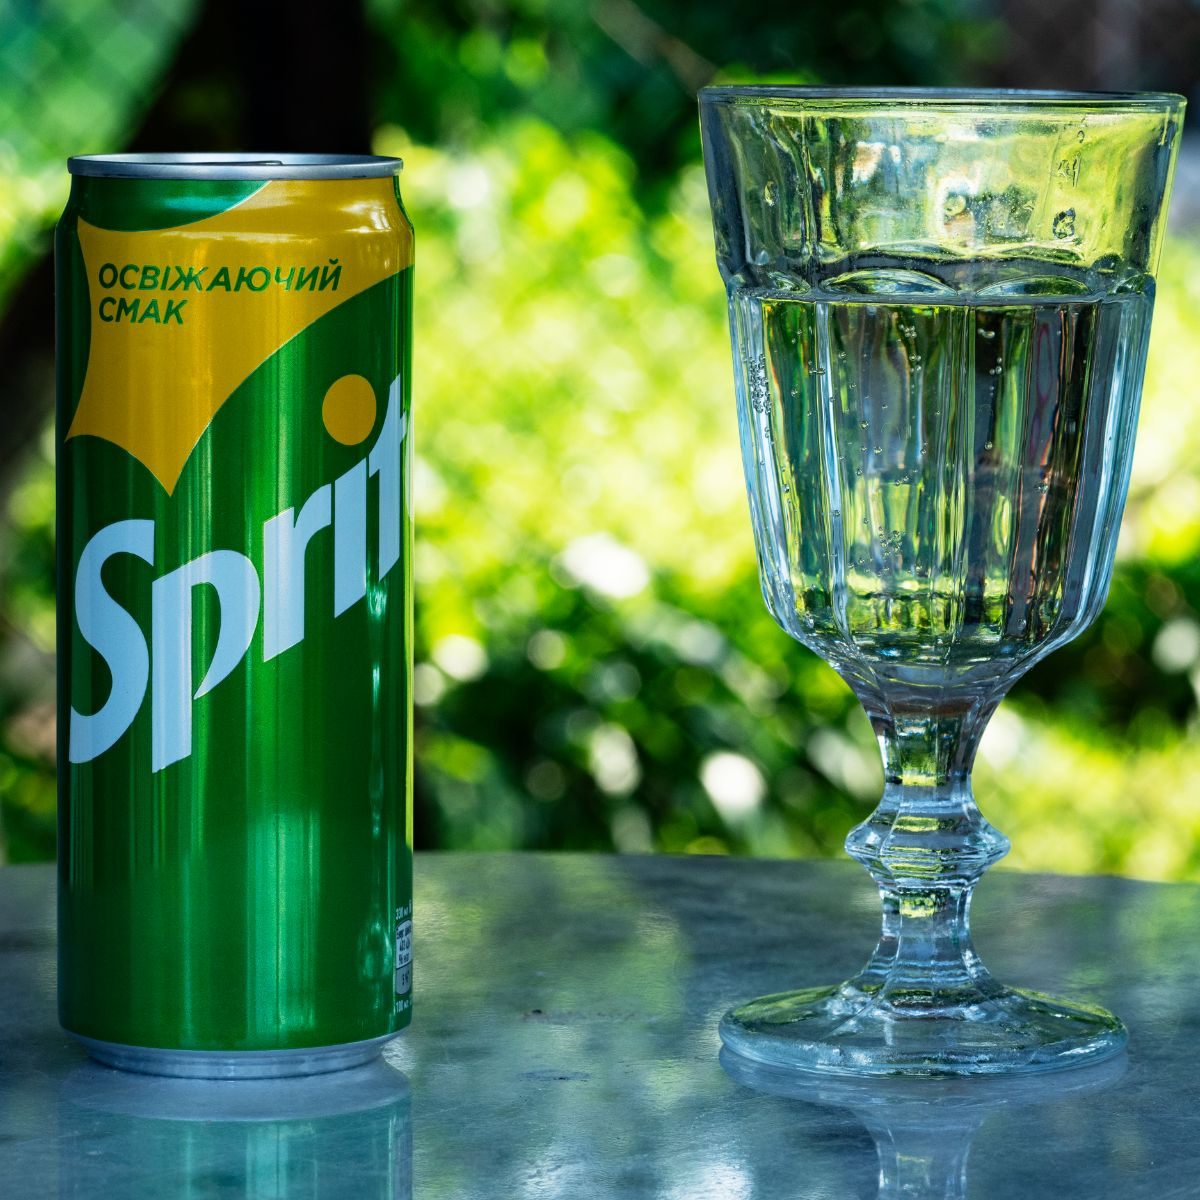 Can You Drink Sprite While Pregnant